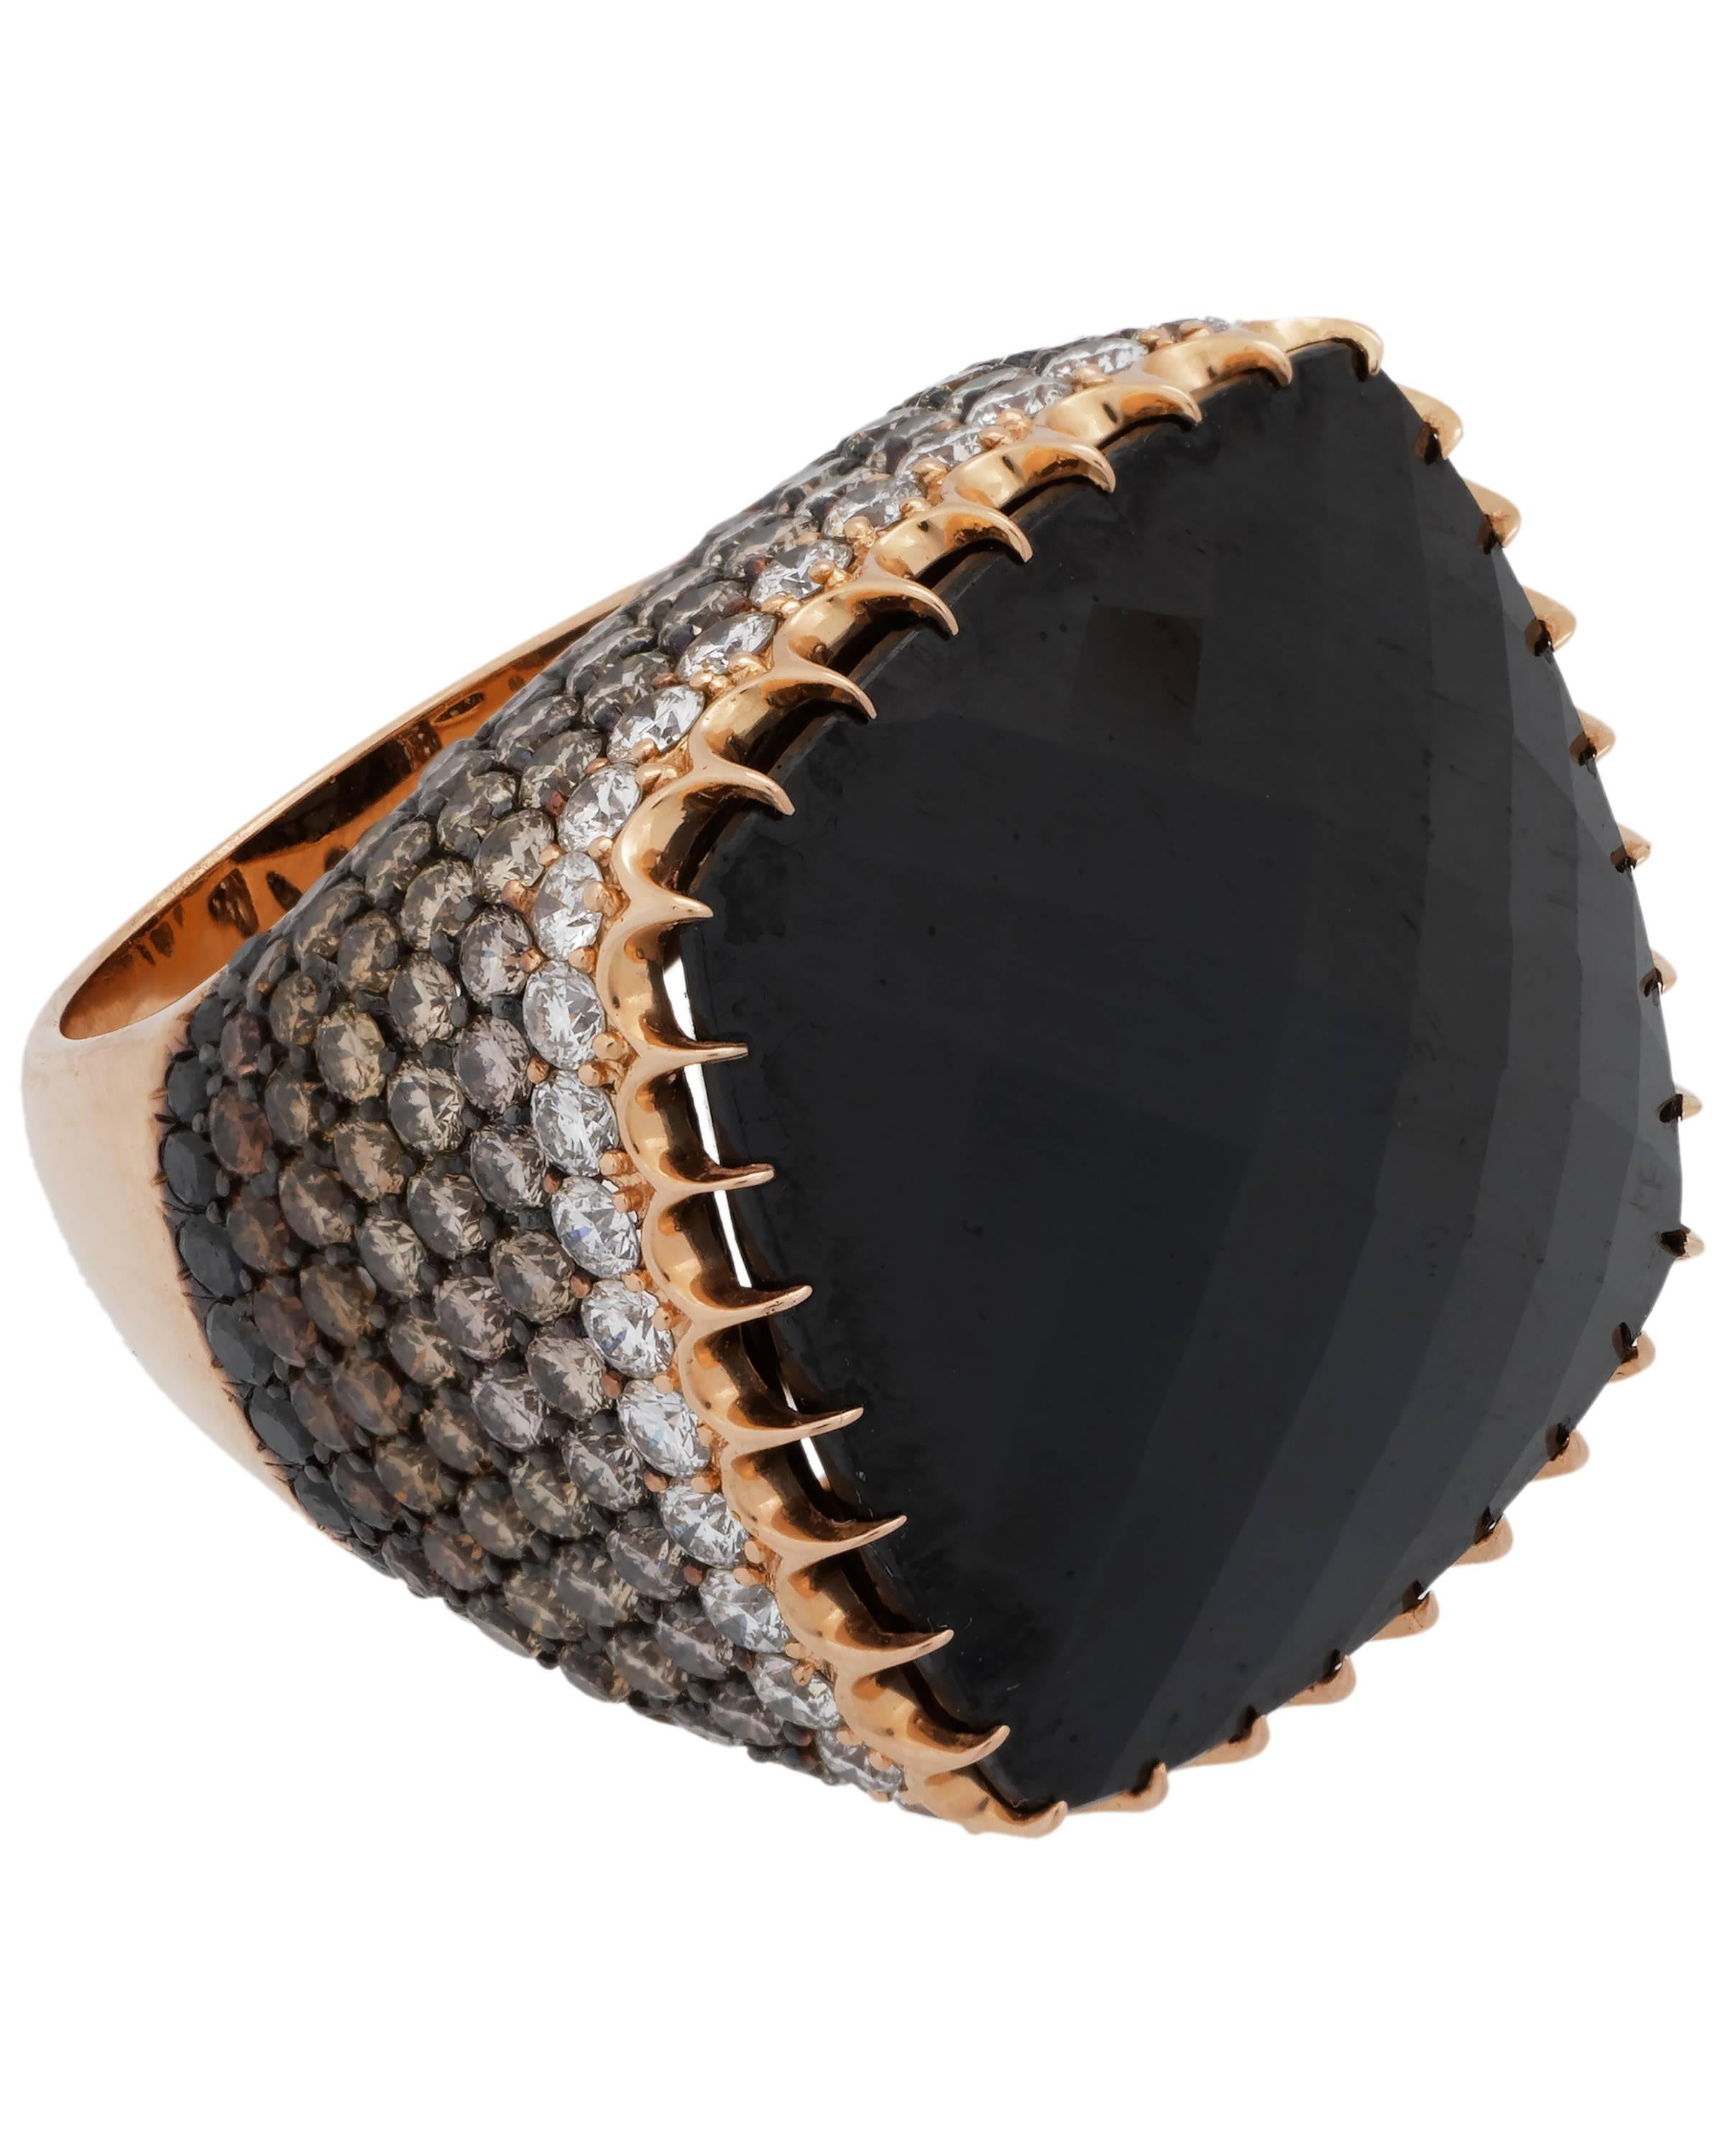 Crivelli 18K Gold Diamond and Onyx Cocktail Custer Ring In New Condition For Sale In Cresskill, NJ